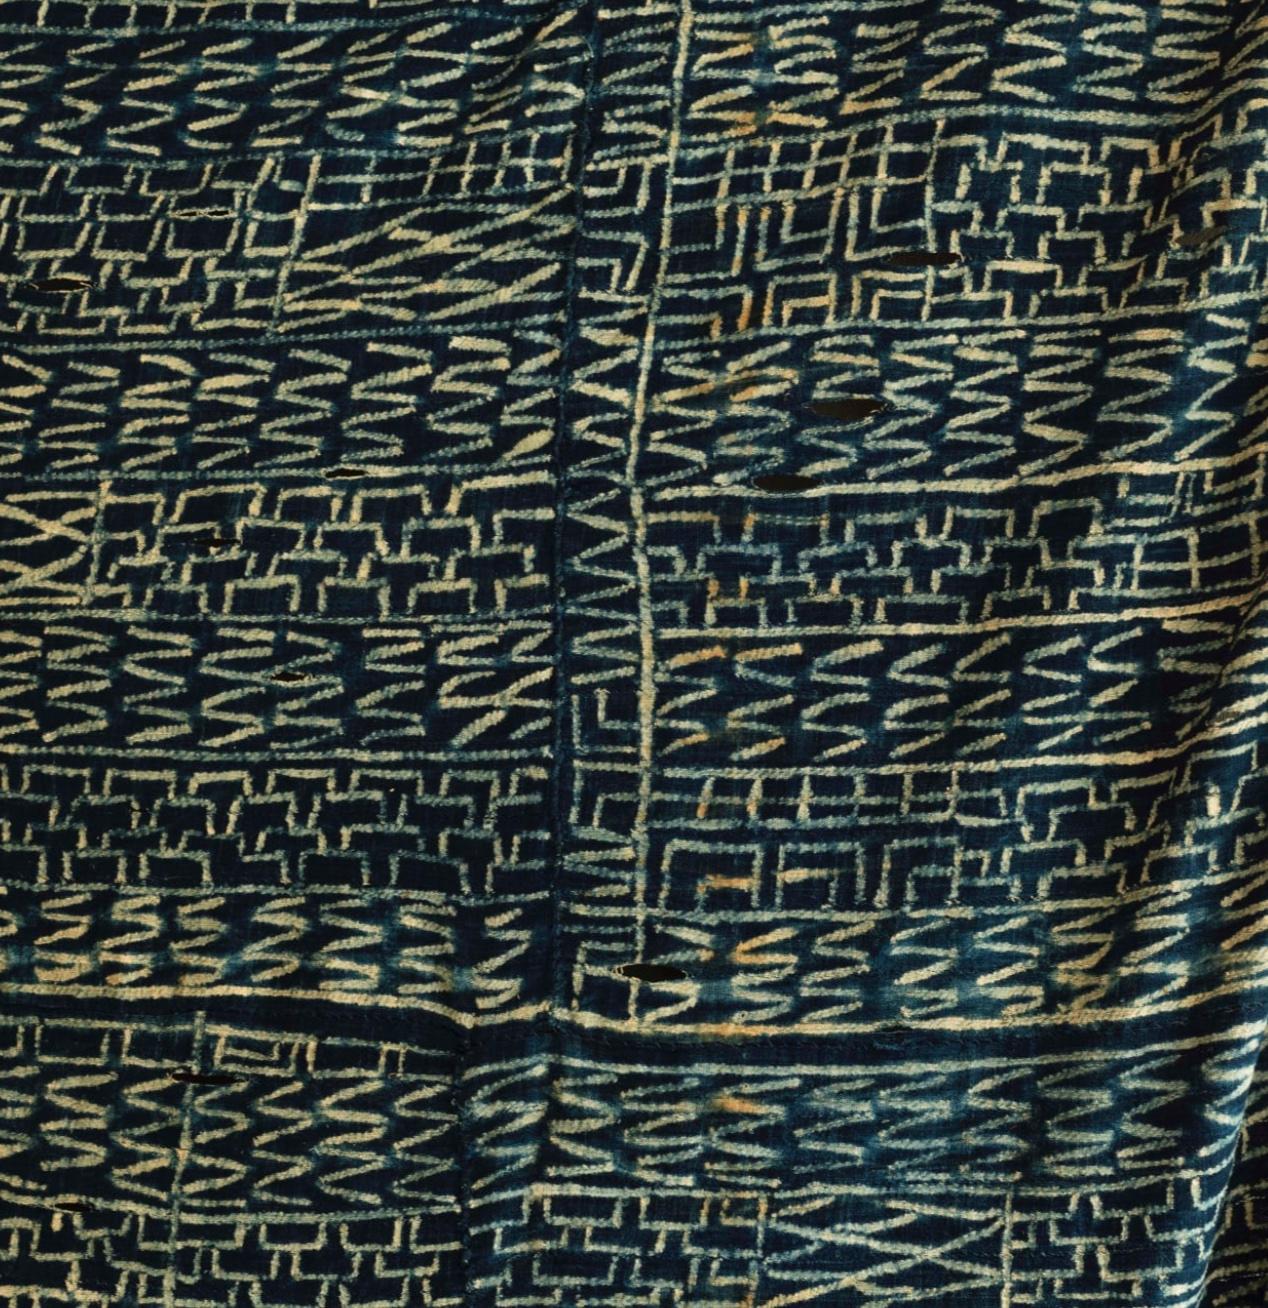 Cameroonian Large Scale N’dop Display Cloth Panel For Sale